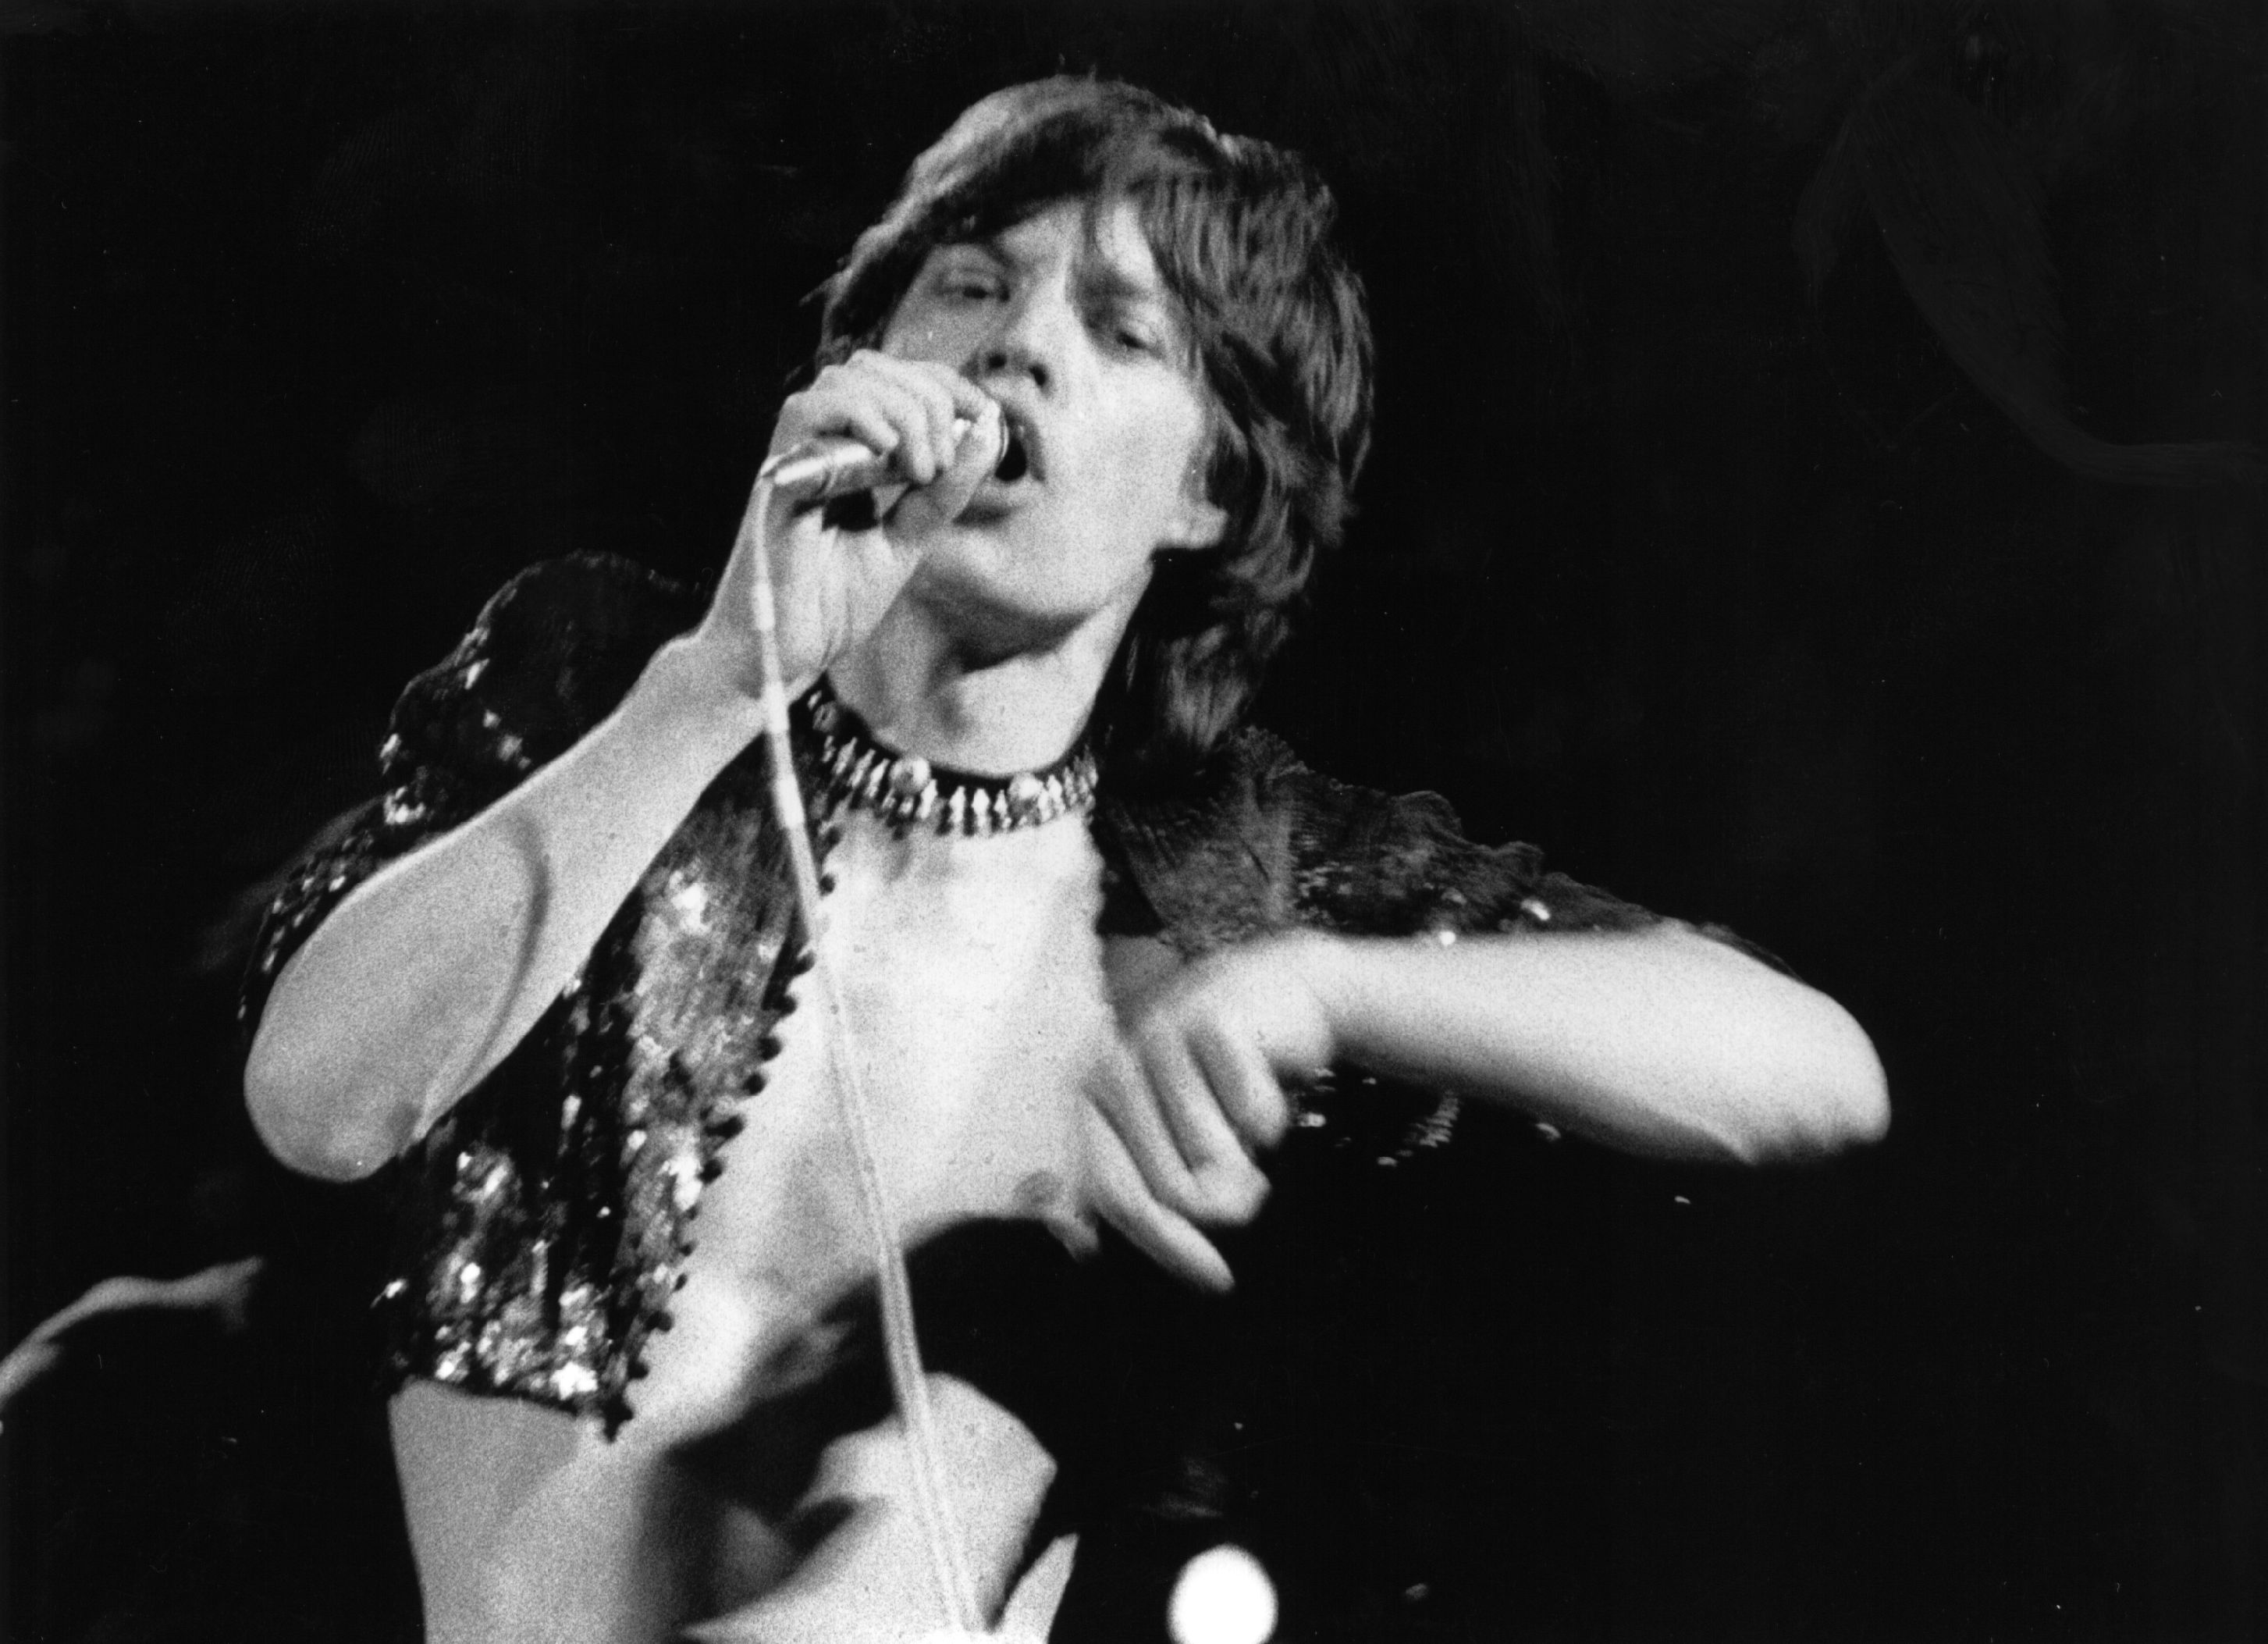 The Rolling Stones' Mick Jagger holding a microphone